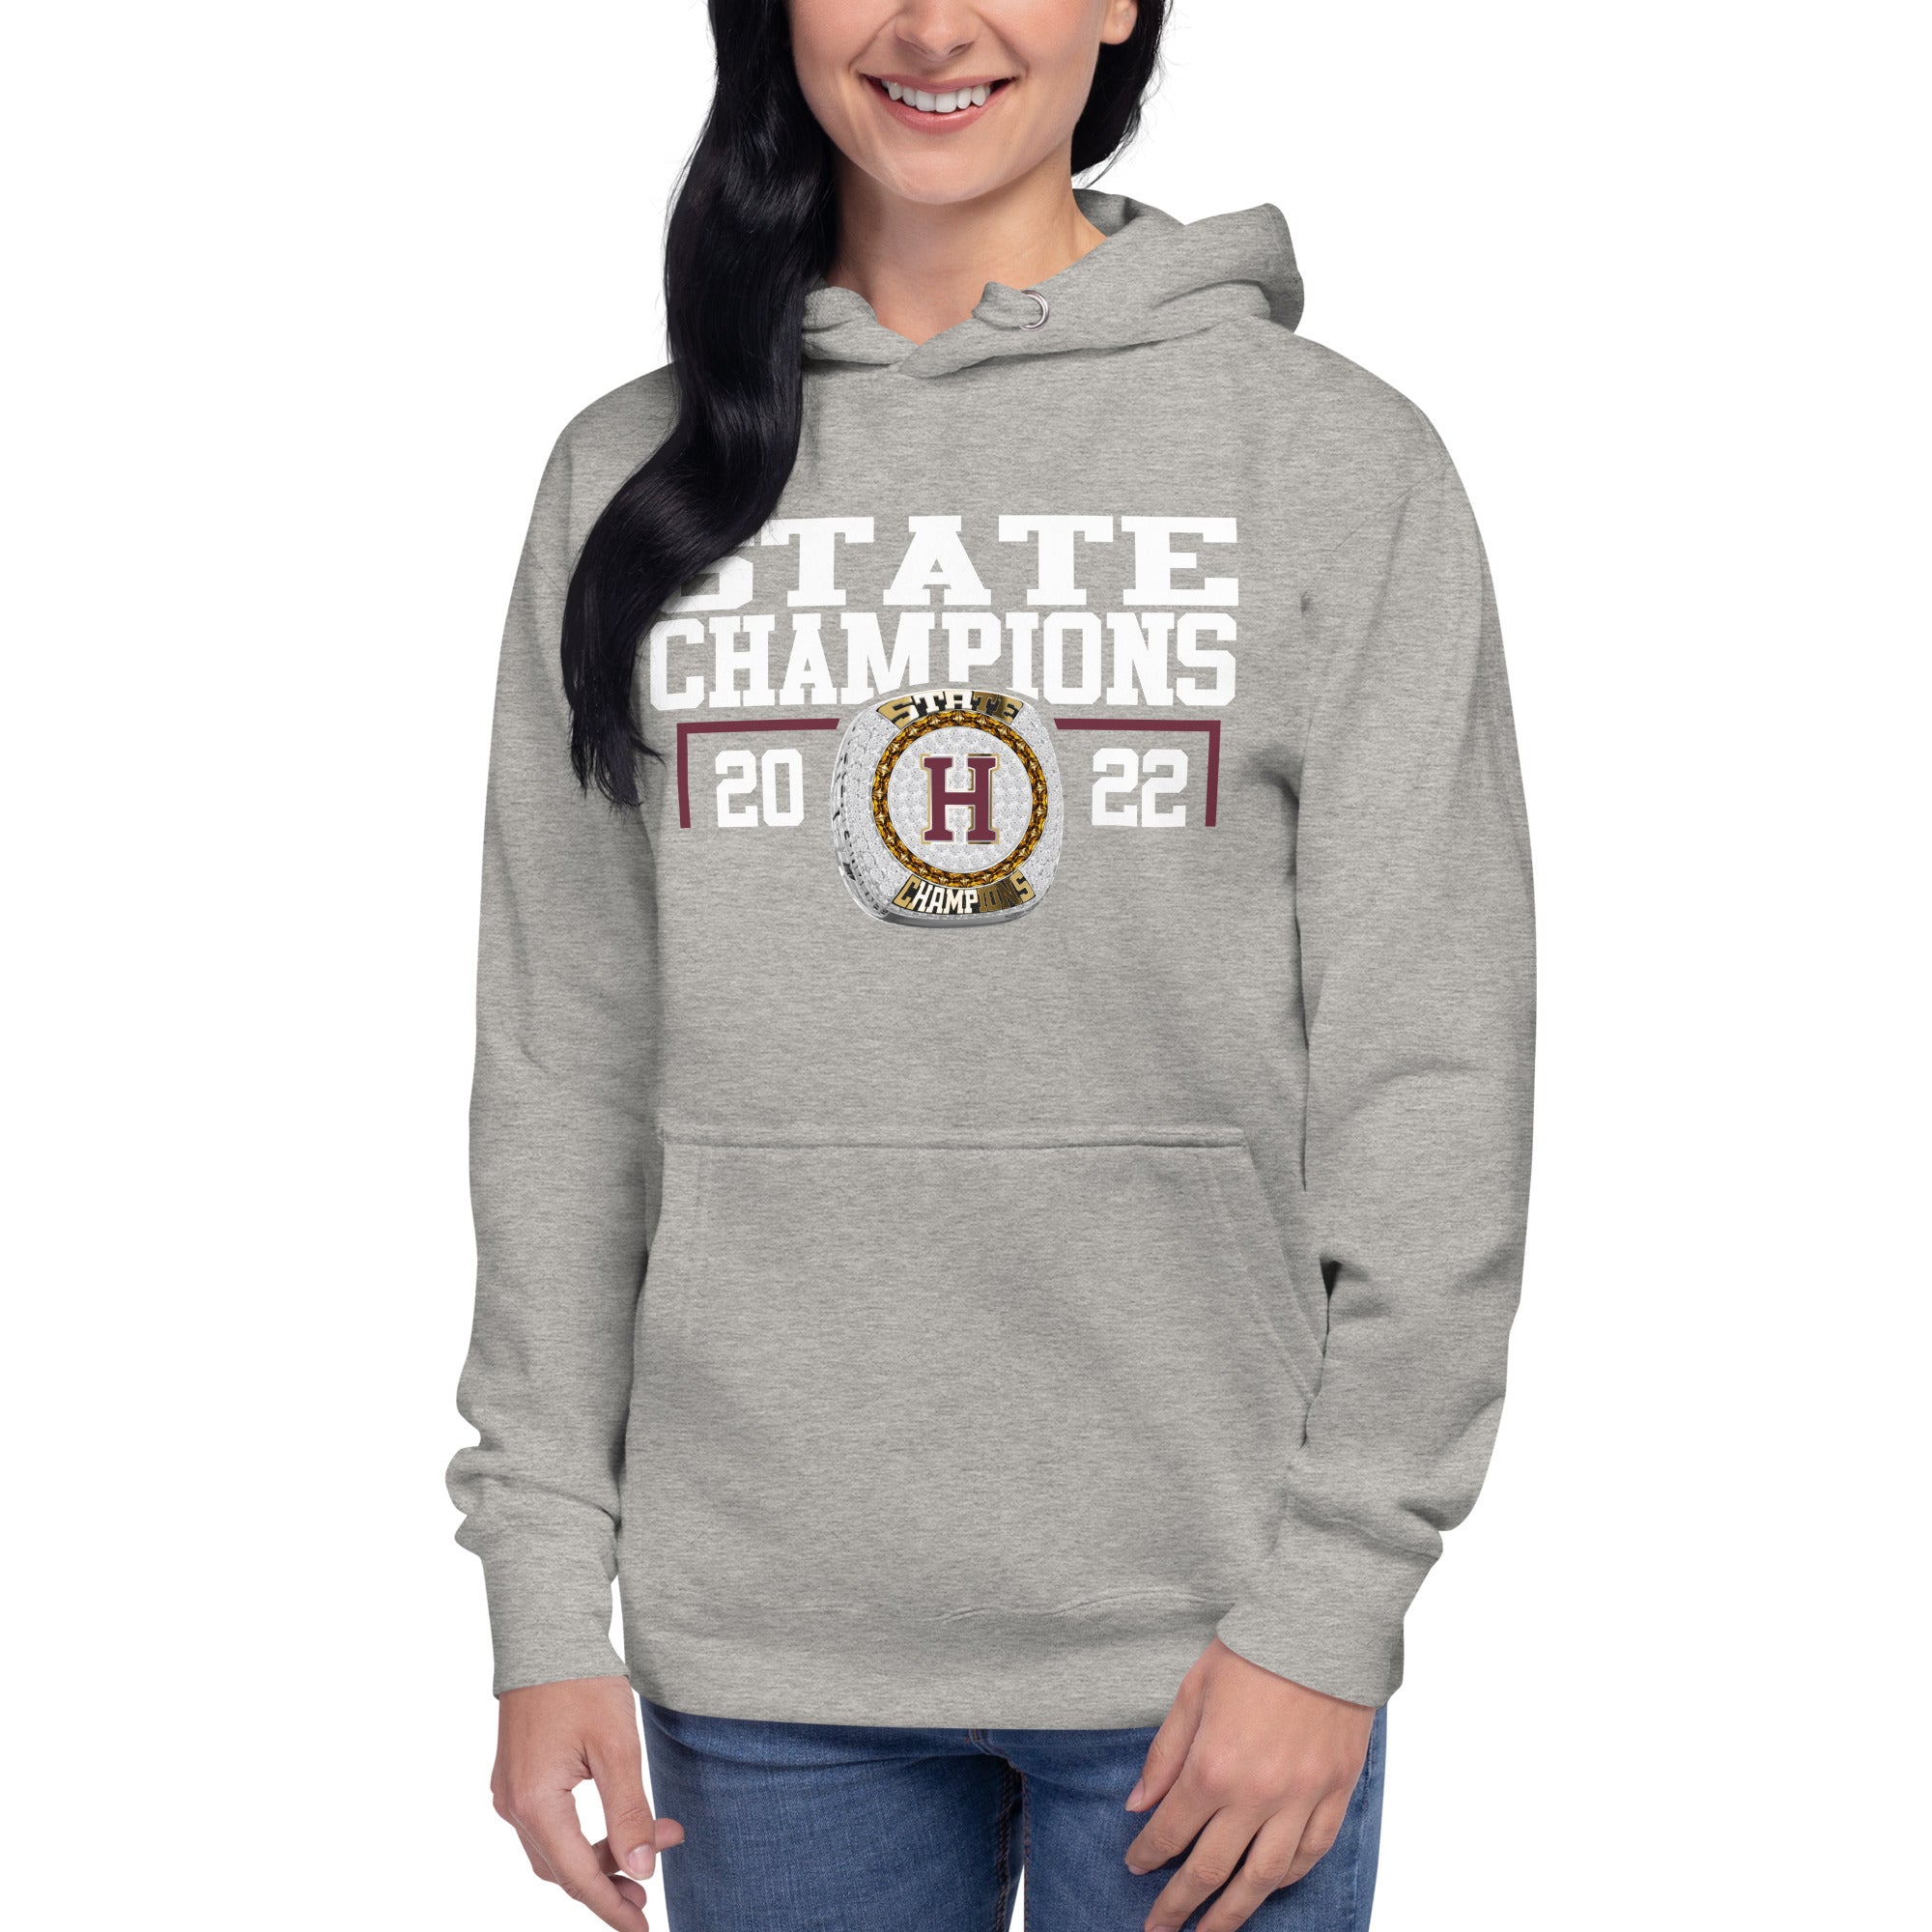 Haverford State Champions Unisex Hoodie